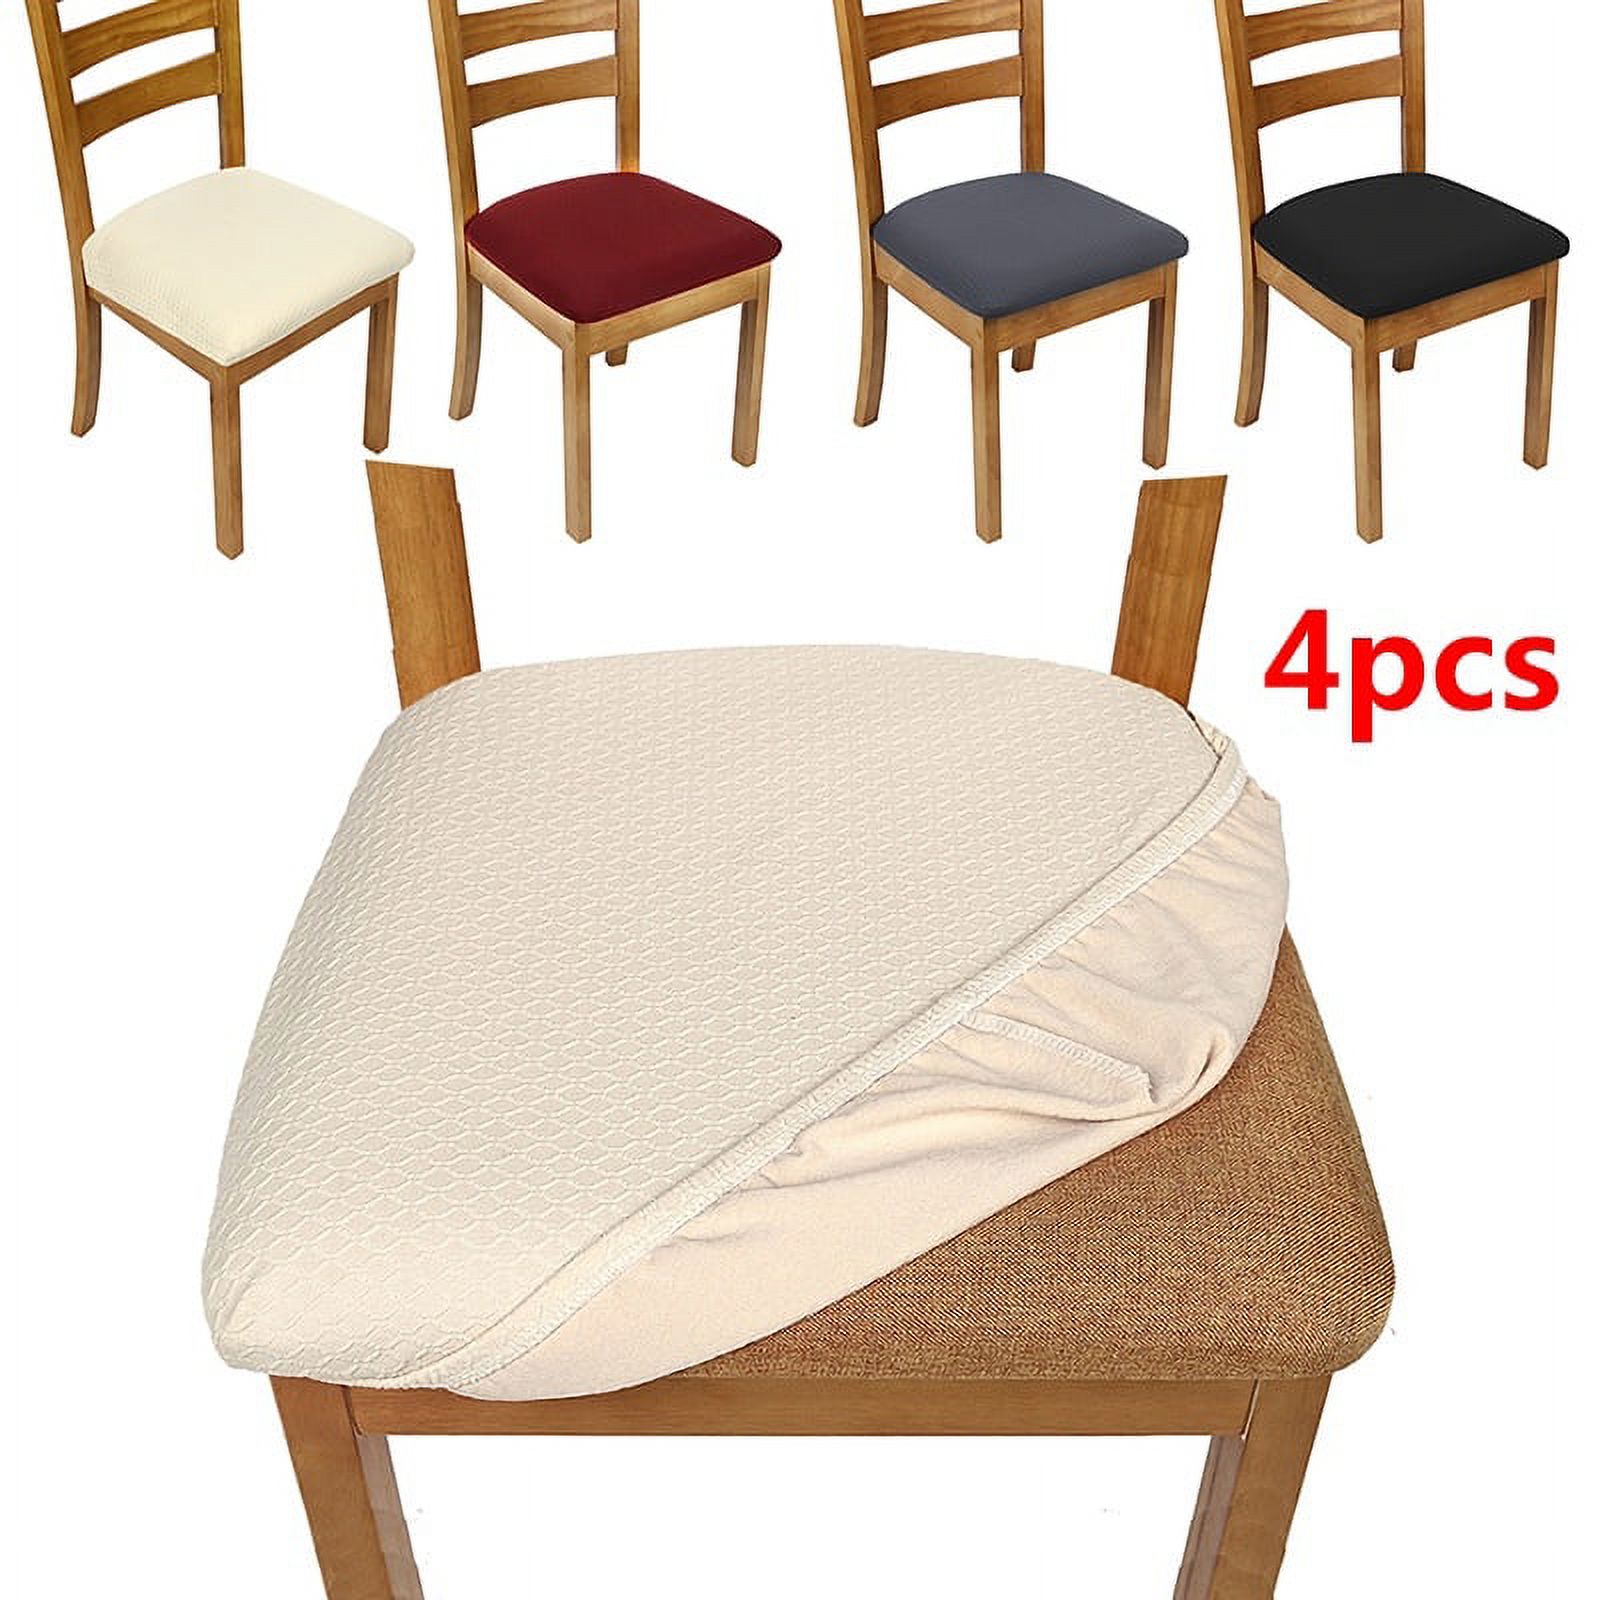 4Pcs/set Stretch Chair Seat Coers Dining Chair Seat Cushion Protectors Chair Slipcoers - image 2 of 6